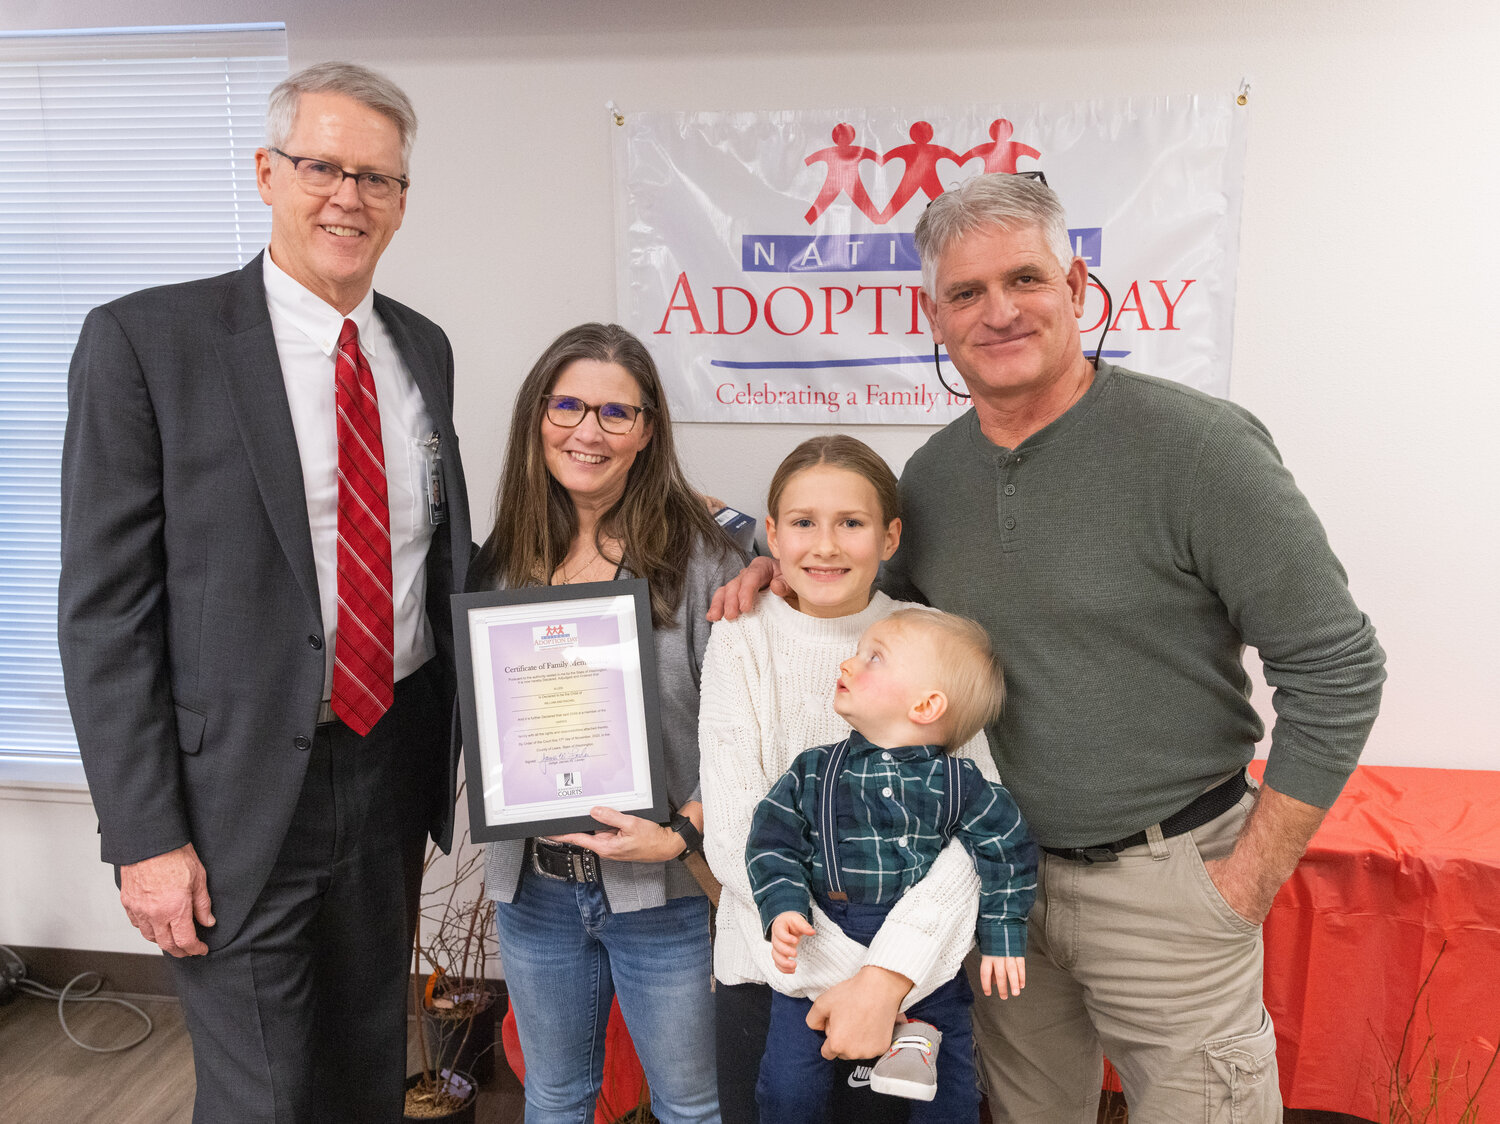 Rachel and William Harris pose for a photo with Judge James W. Lawler and their kids on National Adoption Day Friday afternoon in Chehalis.